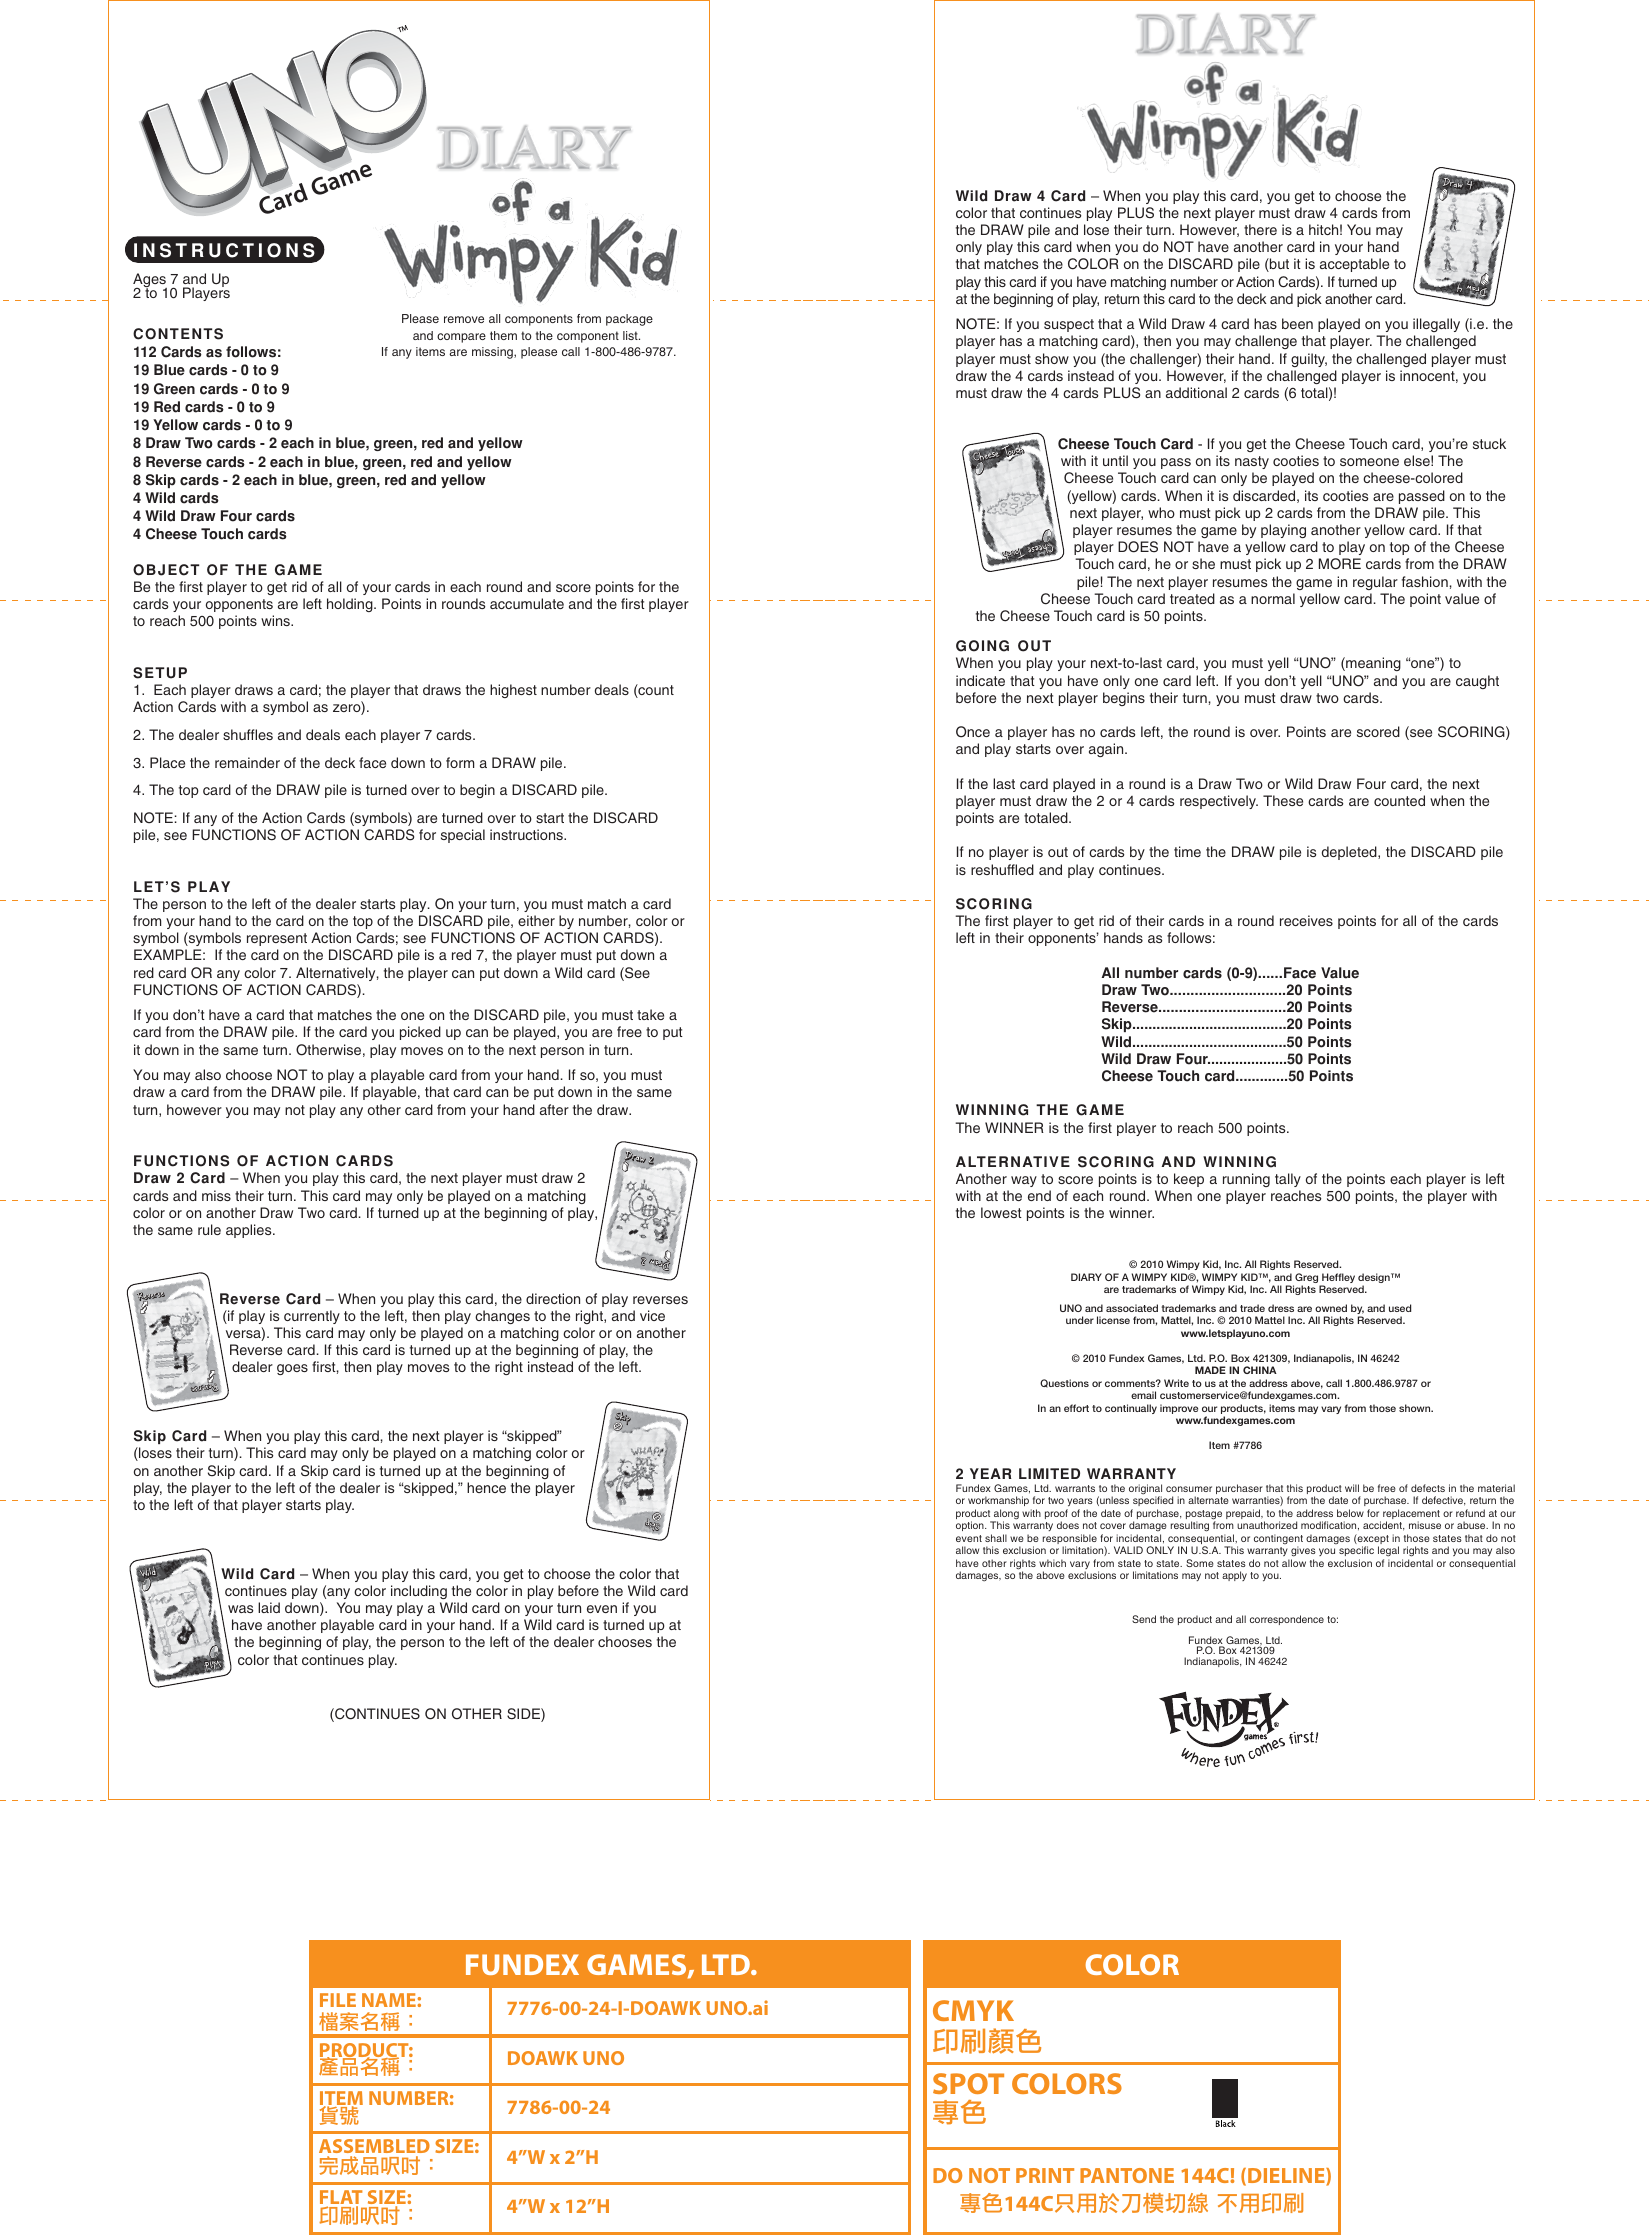 Page 1 of 1 - Fundex-Games Fundex-Games-Uno-Diary-Of-A-Wimpy-Kid-Users-Manual- 7786-00-24-I_DOAWK UNO  Fundex-games-uno-diary-of-a-wimpy-kid-users-manual